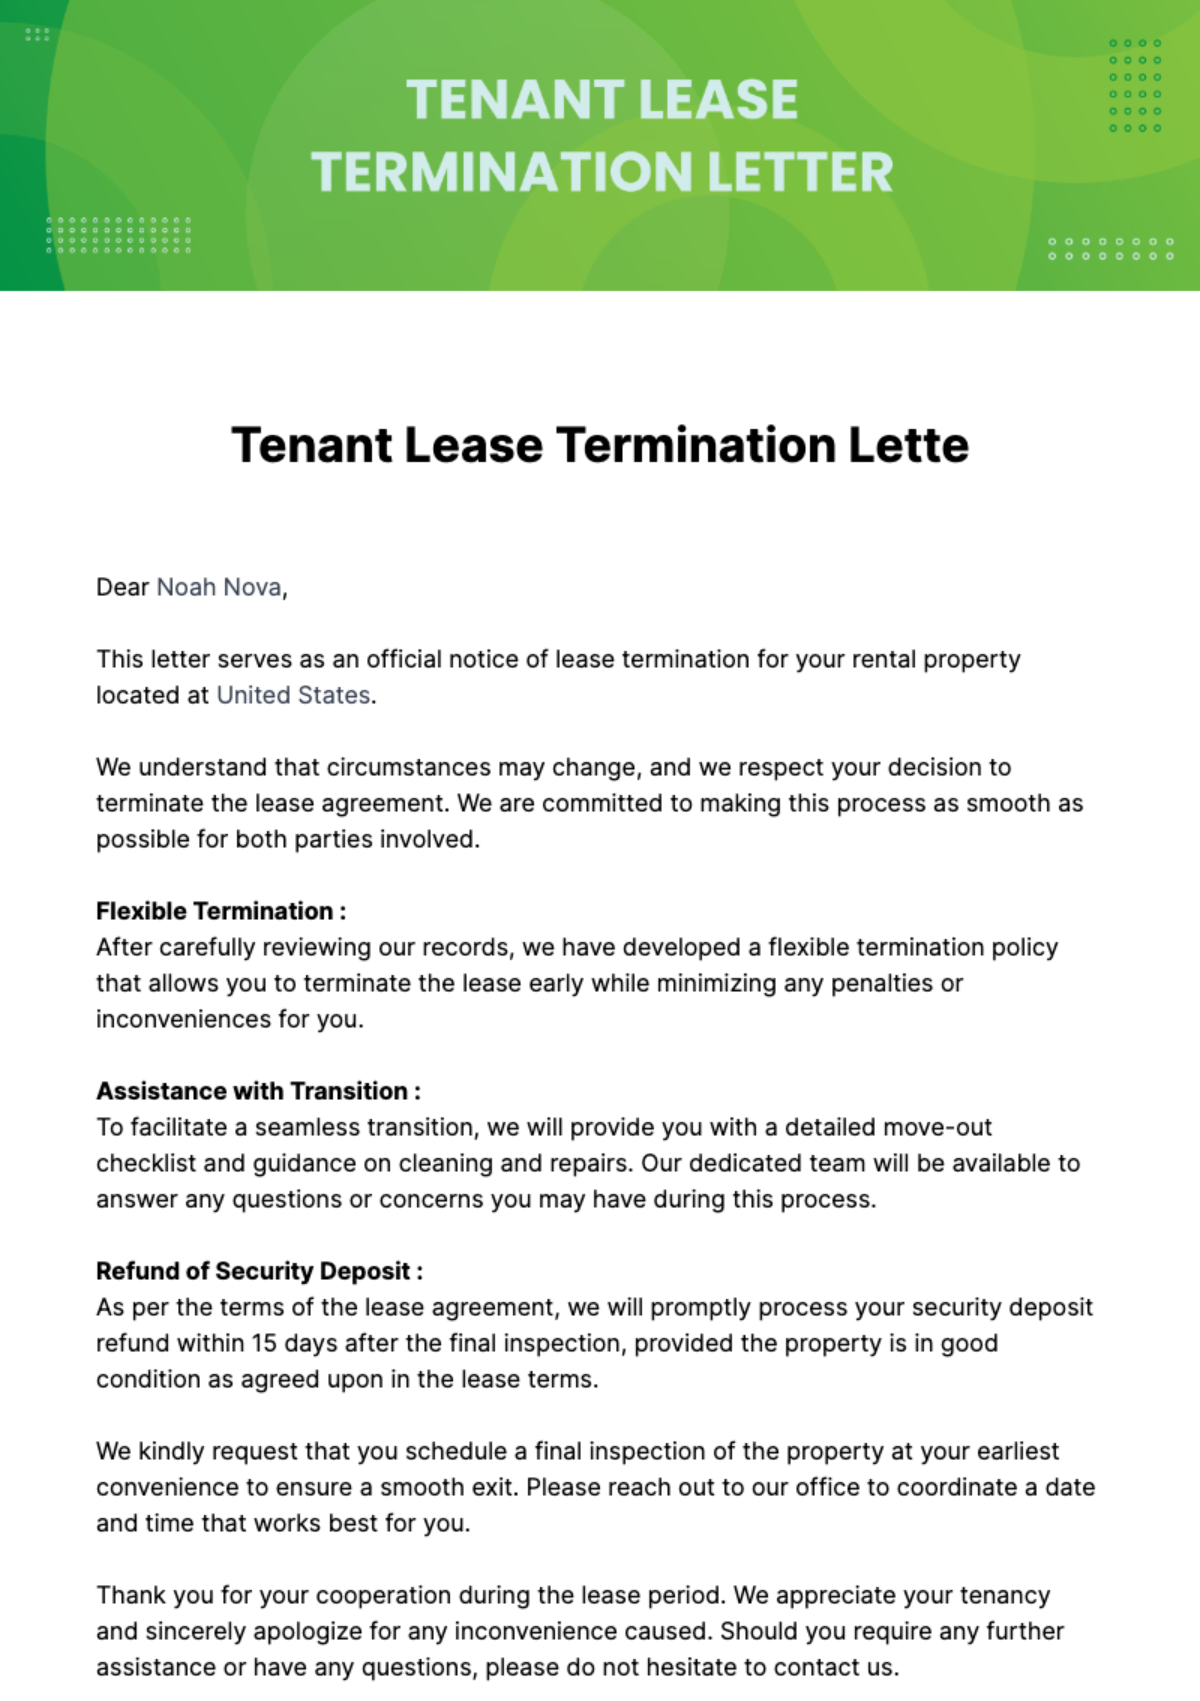 Tenant Lease Termination Letter Template